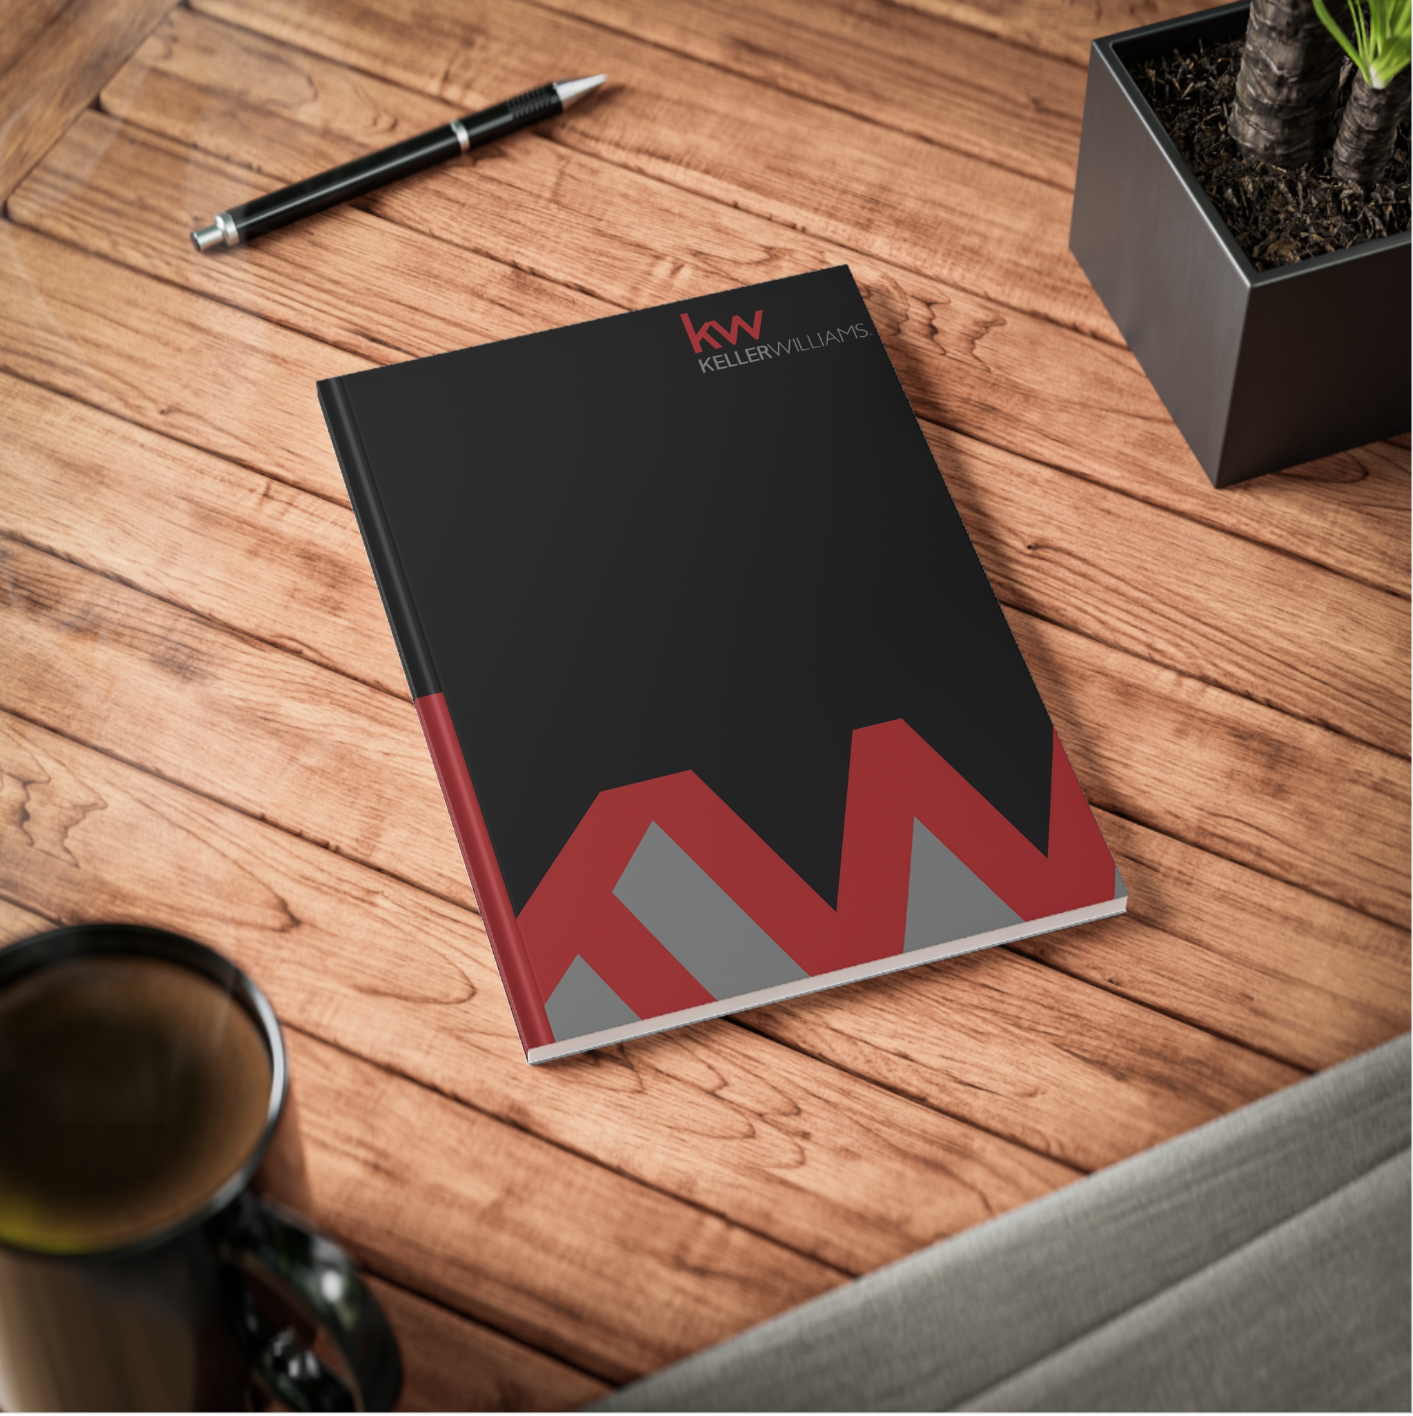 KW Full Color SoftCover Binders Black KW Monogram (from as low as $6.18 per cover)